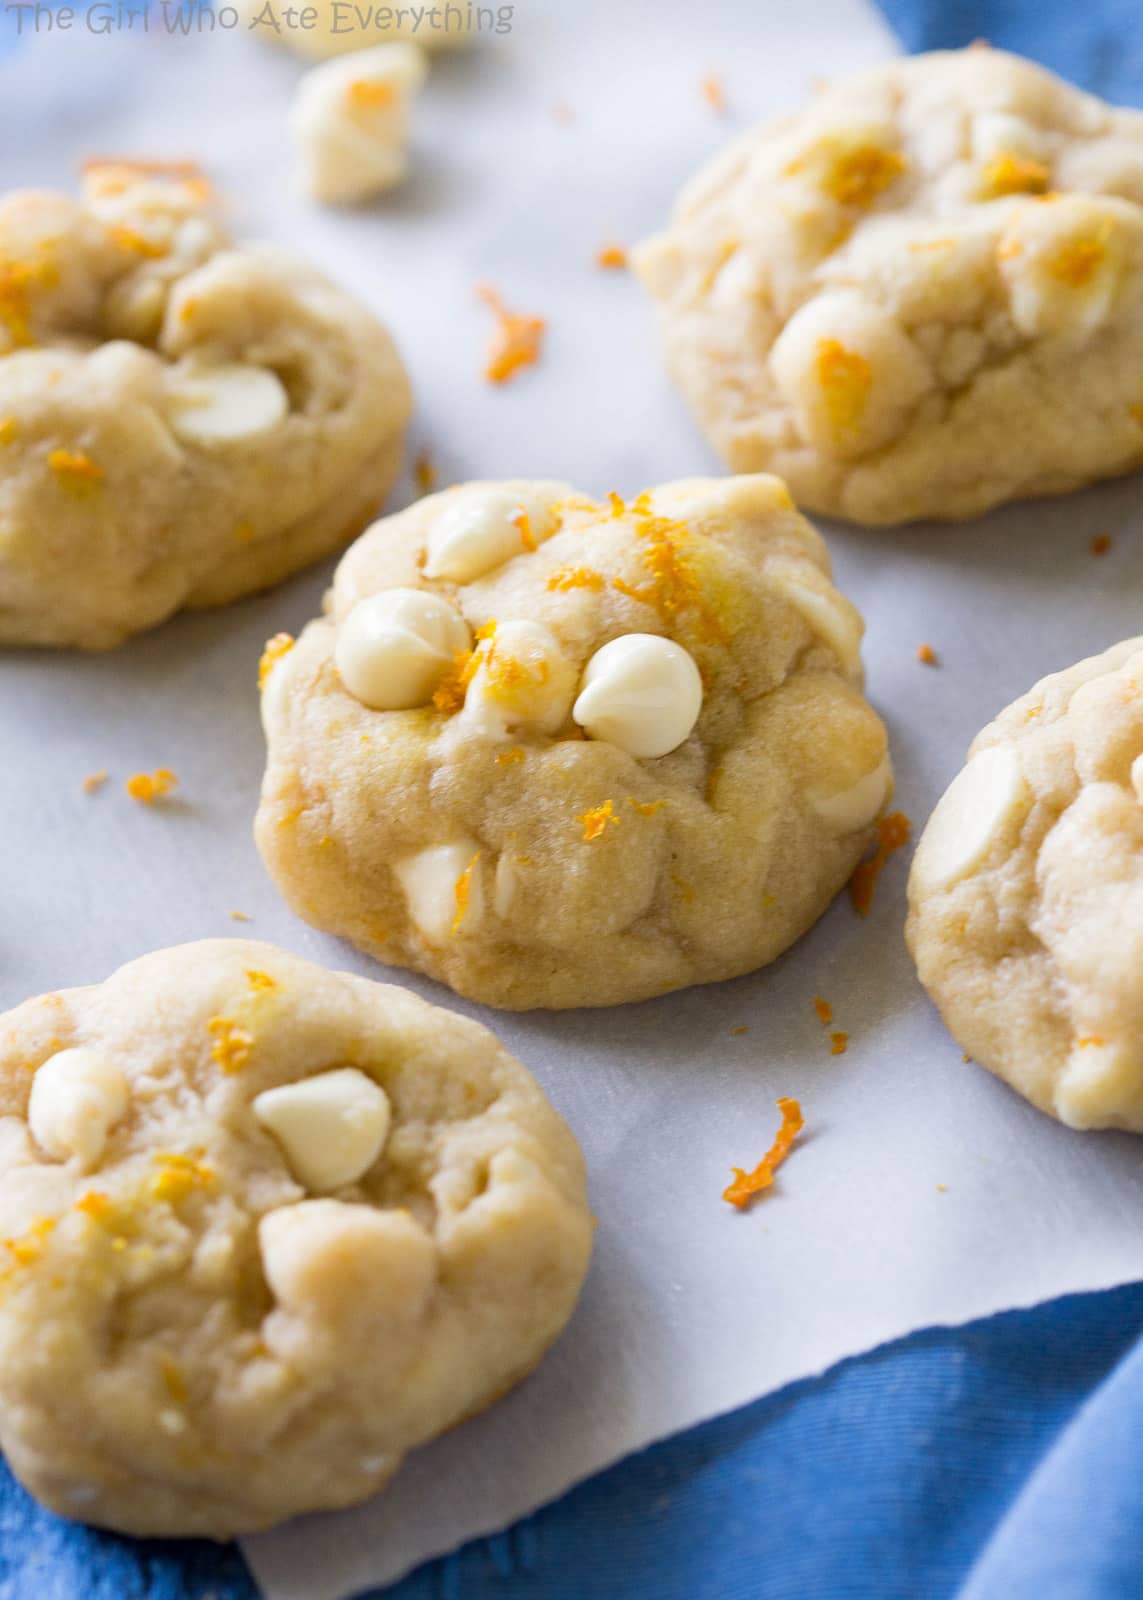 Orange Creamsicle Cookies - soft cookies with white chocolate chips and orange zest. Taste just like the popsicle. the-girl-who-ate-everything.com